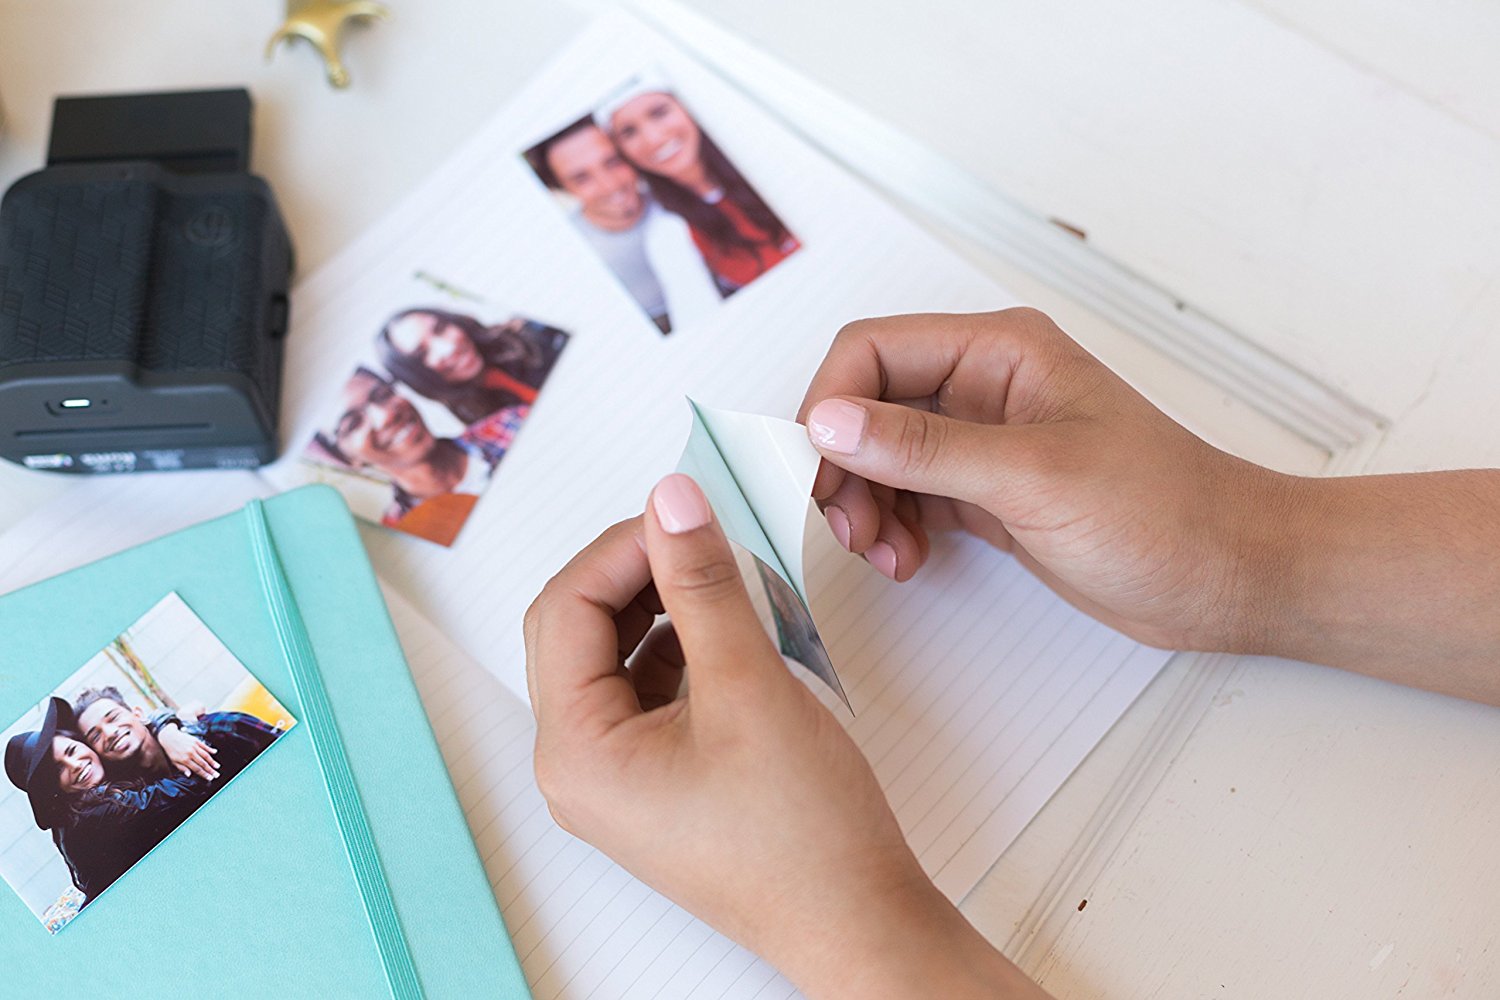 Prynt Pocket, Instant Photo Printer for iPhone